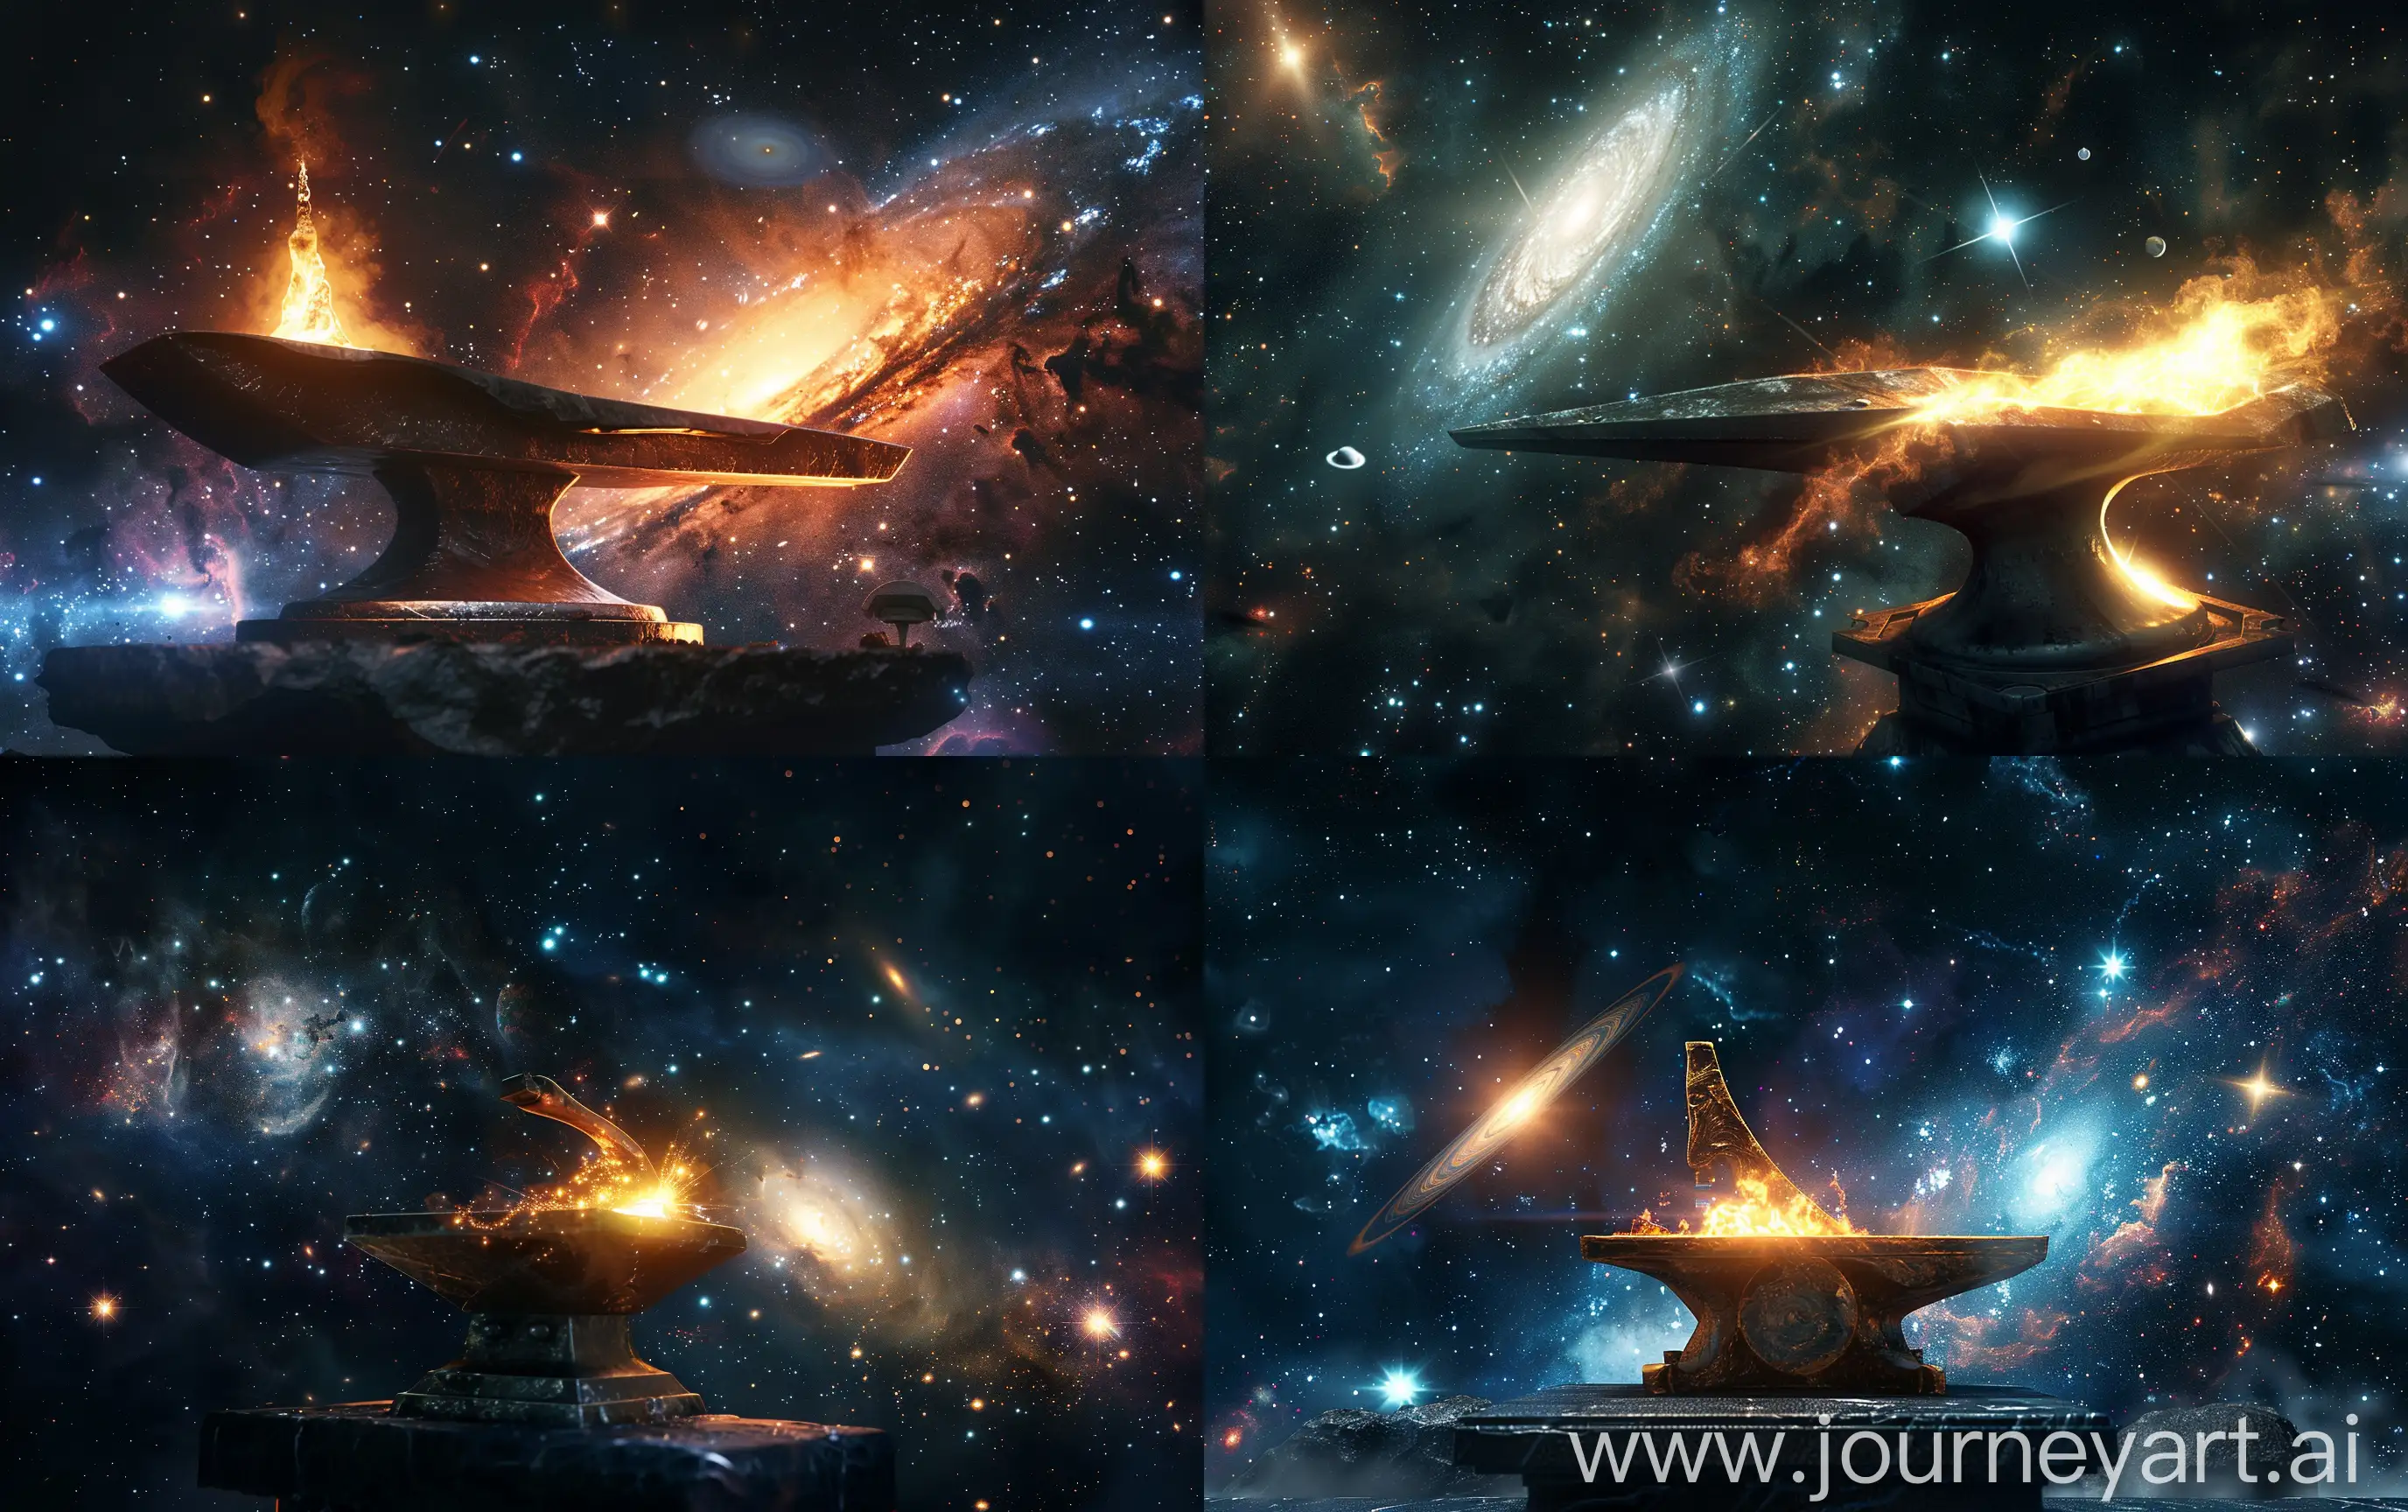 Celestial-Supernova-Fusion-Forge-Anvil-in-Glowing-Deep-Space-with-Galaxies-and-Nebula